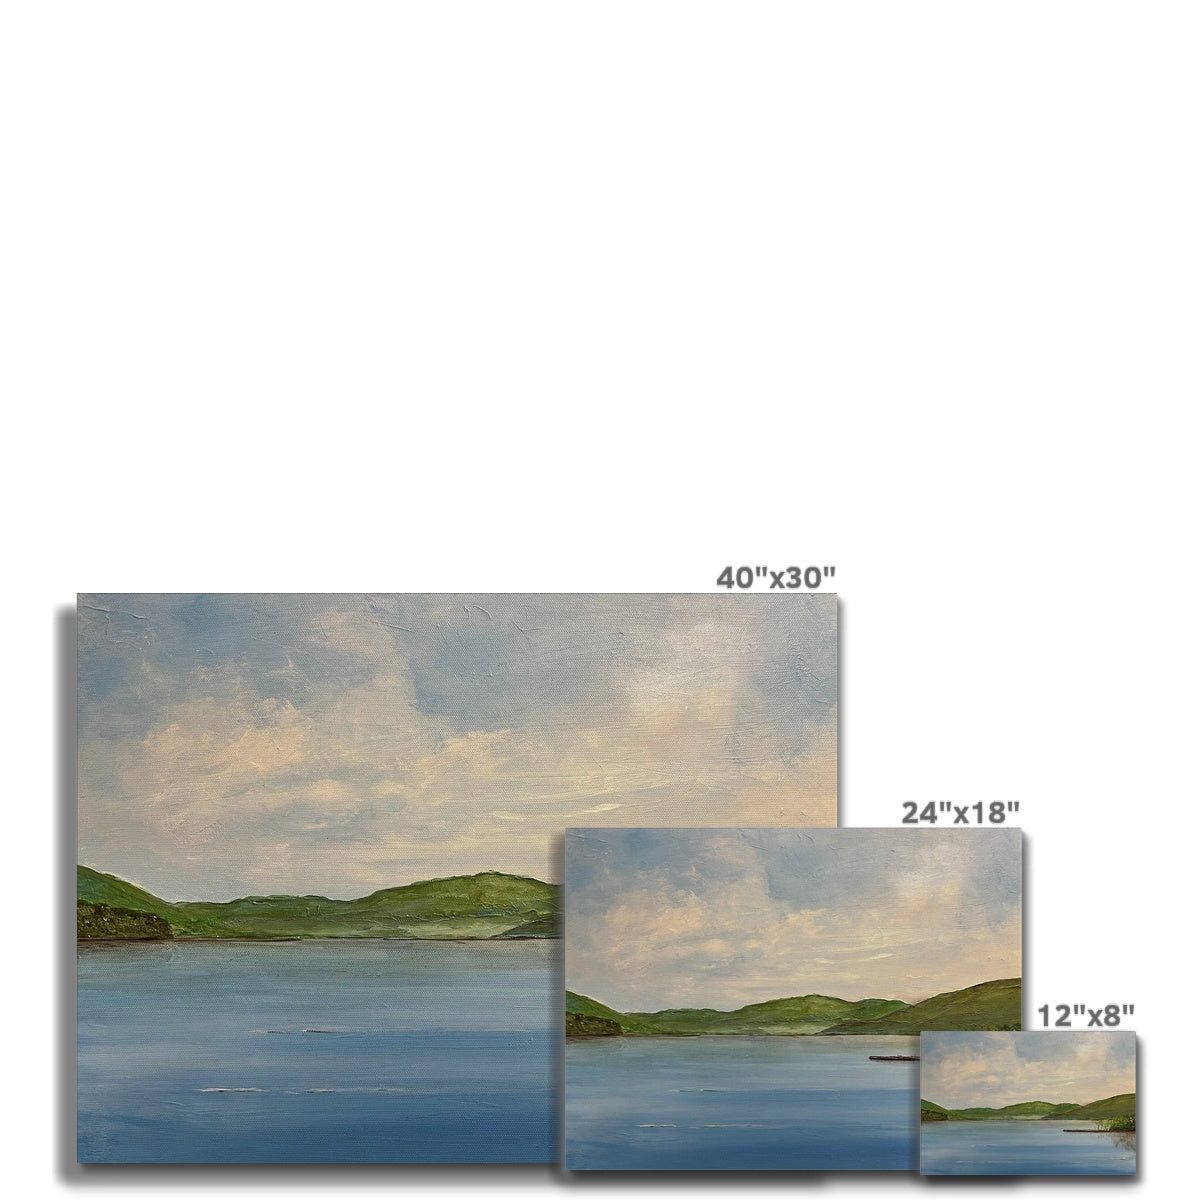 Loch Tay ii Painting | Canvas From Scotland-Contemporary Stretched Canvas Prints-Scottish Lochs & Mountains Art Gallery-Paintings, Prints, Homeware, Art Gifts From Scotland By Scottish Artist Kevin Hunter